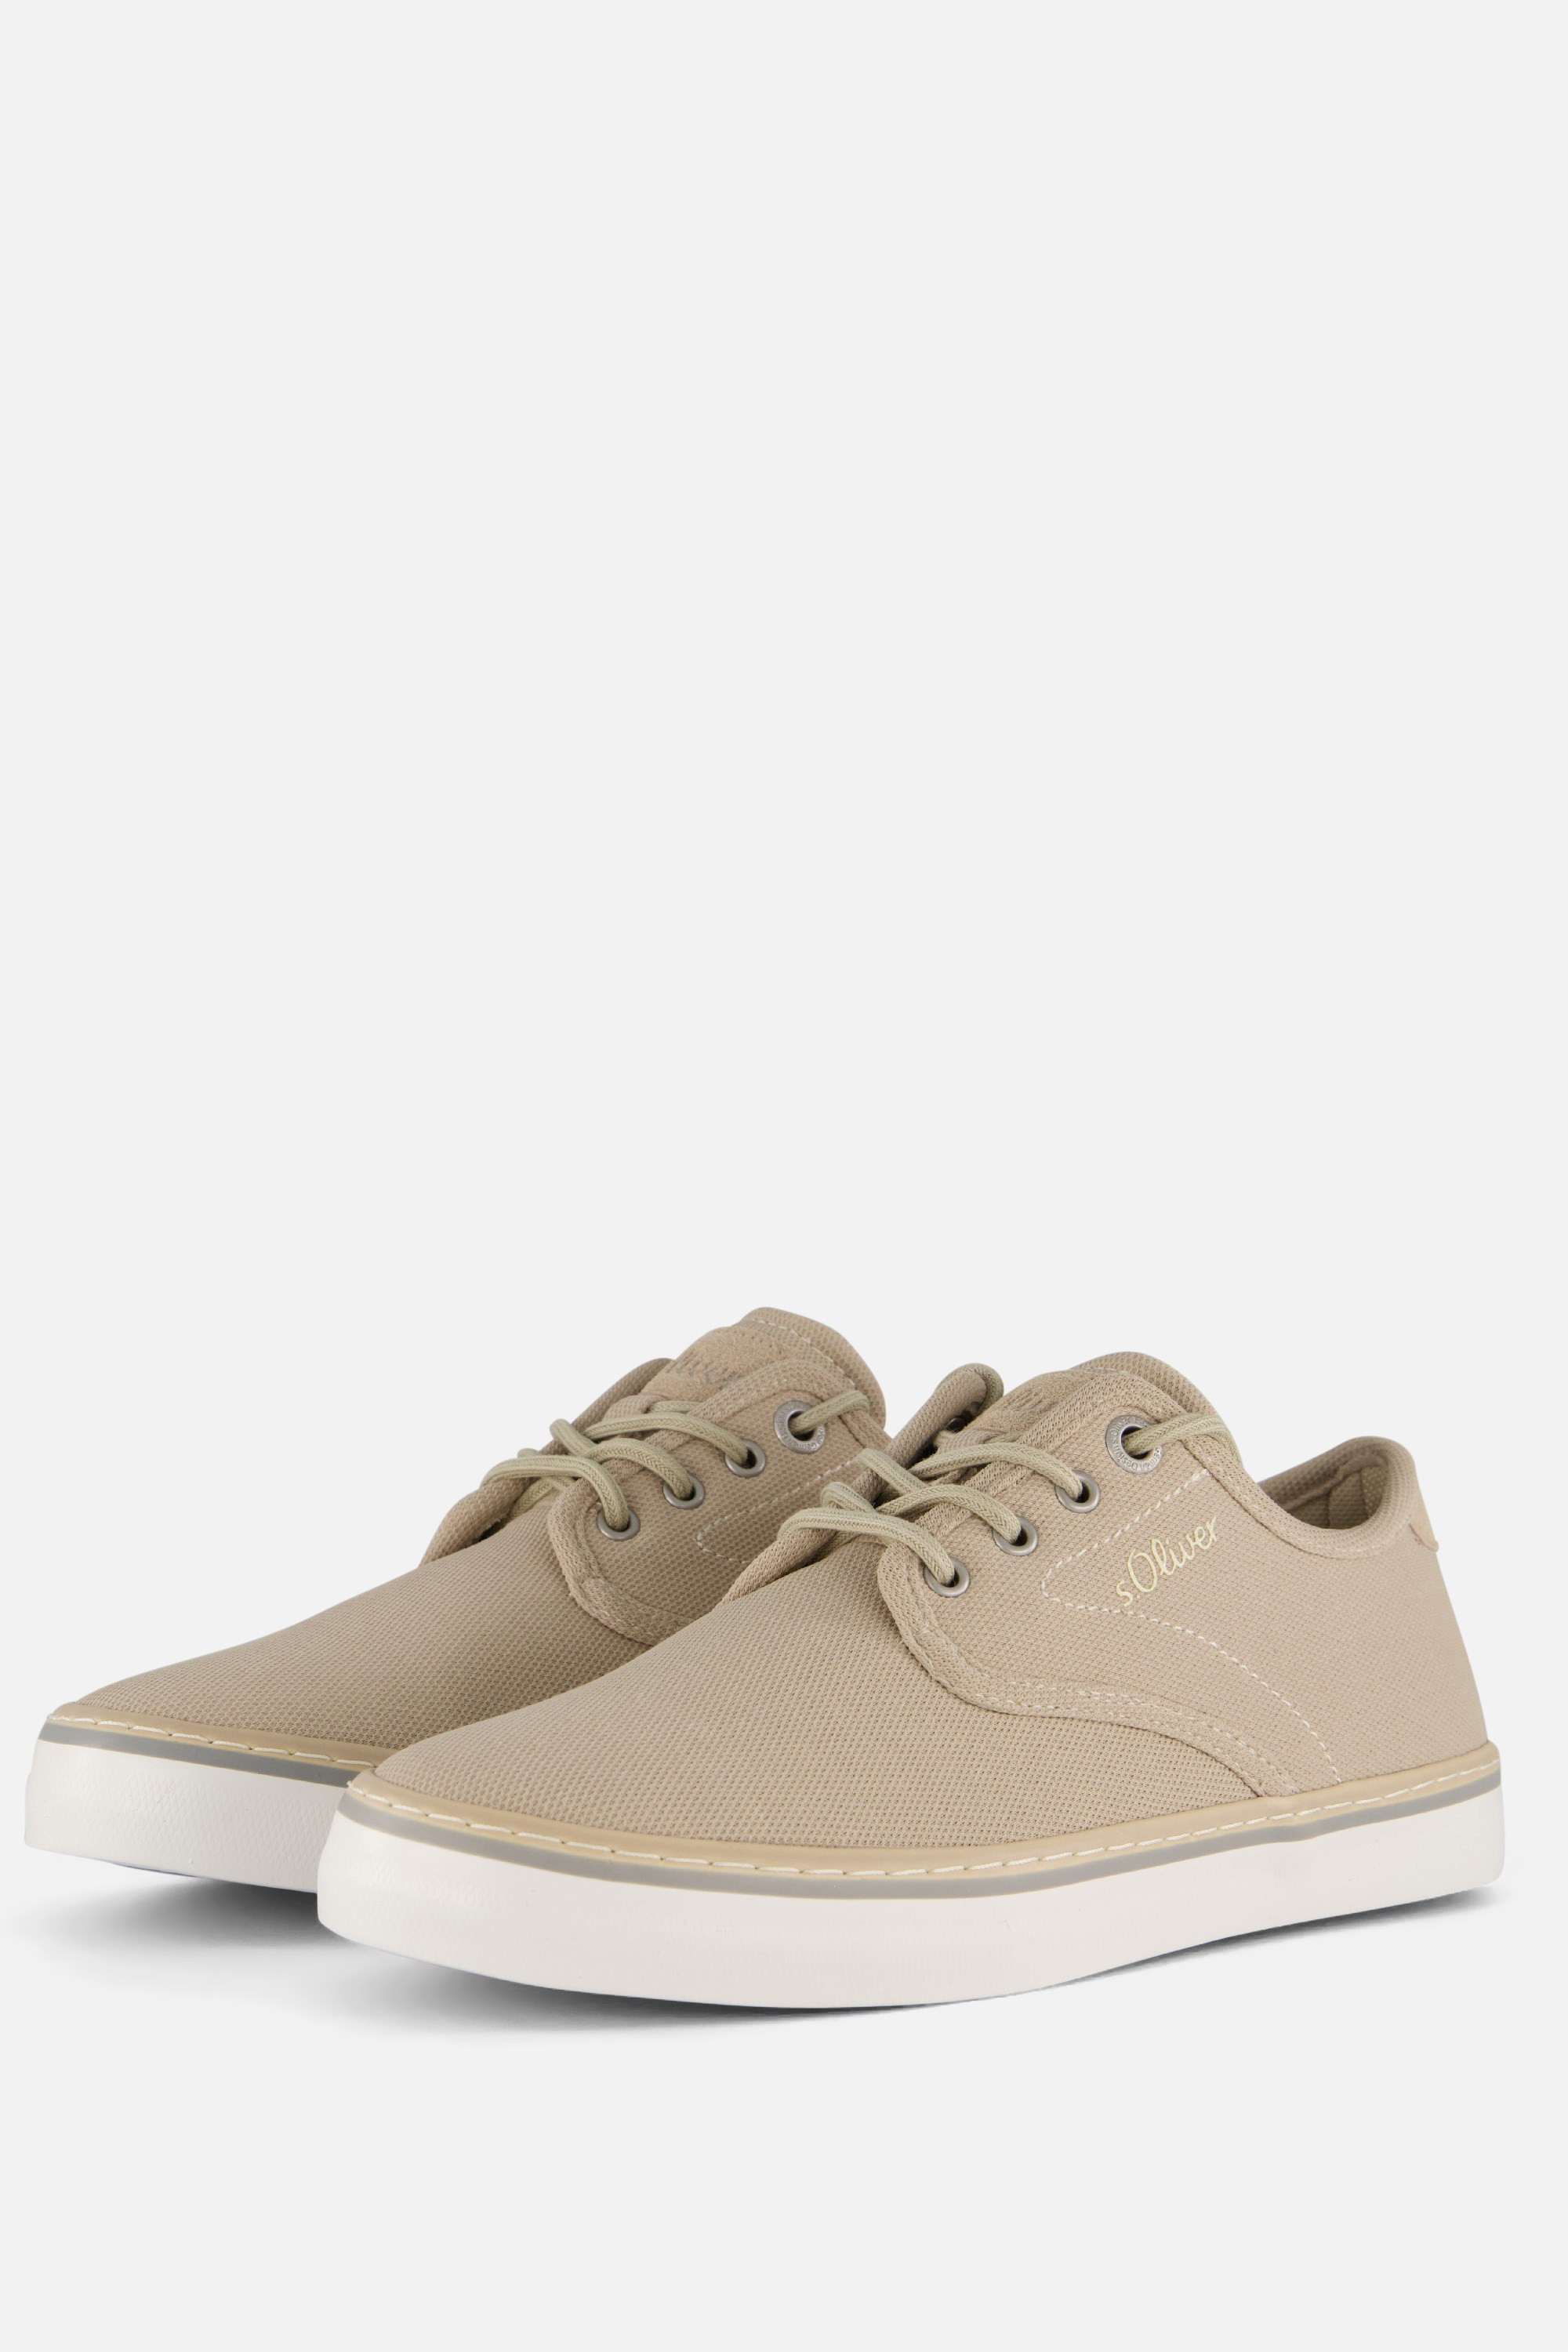 S.Oliver S.Oliver Sneakers beige Synthetisch